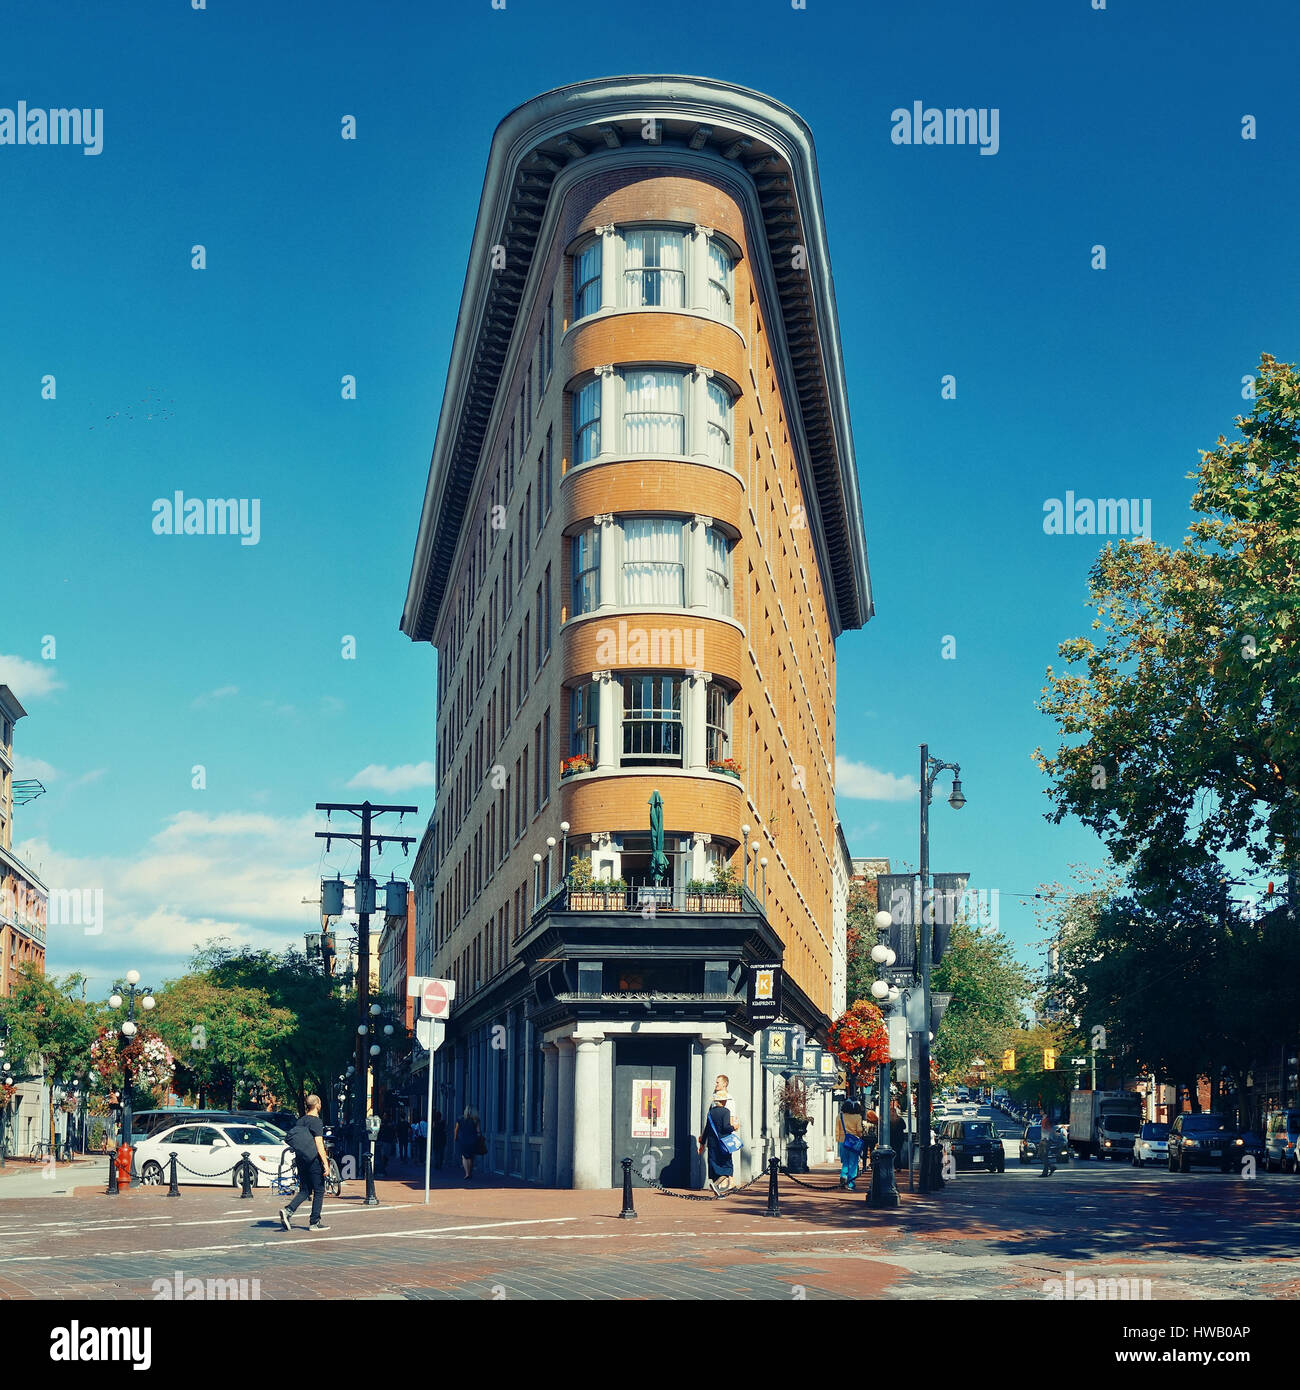 VANCOUVER, BC - AUG 17: Hotel Europe and street view on August 17, 2015 in Vancouver, Canada. With 603k population, it is one of the most ethnically d Stock Photo